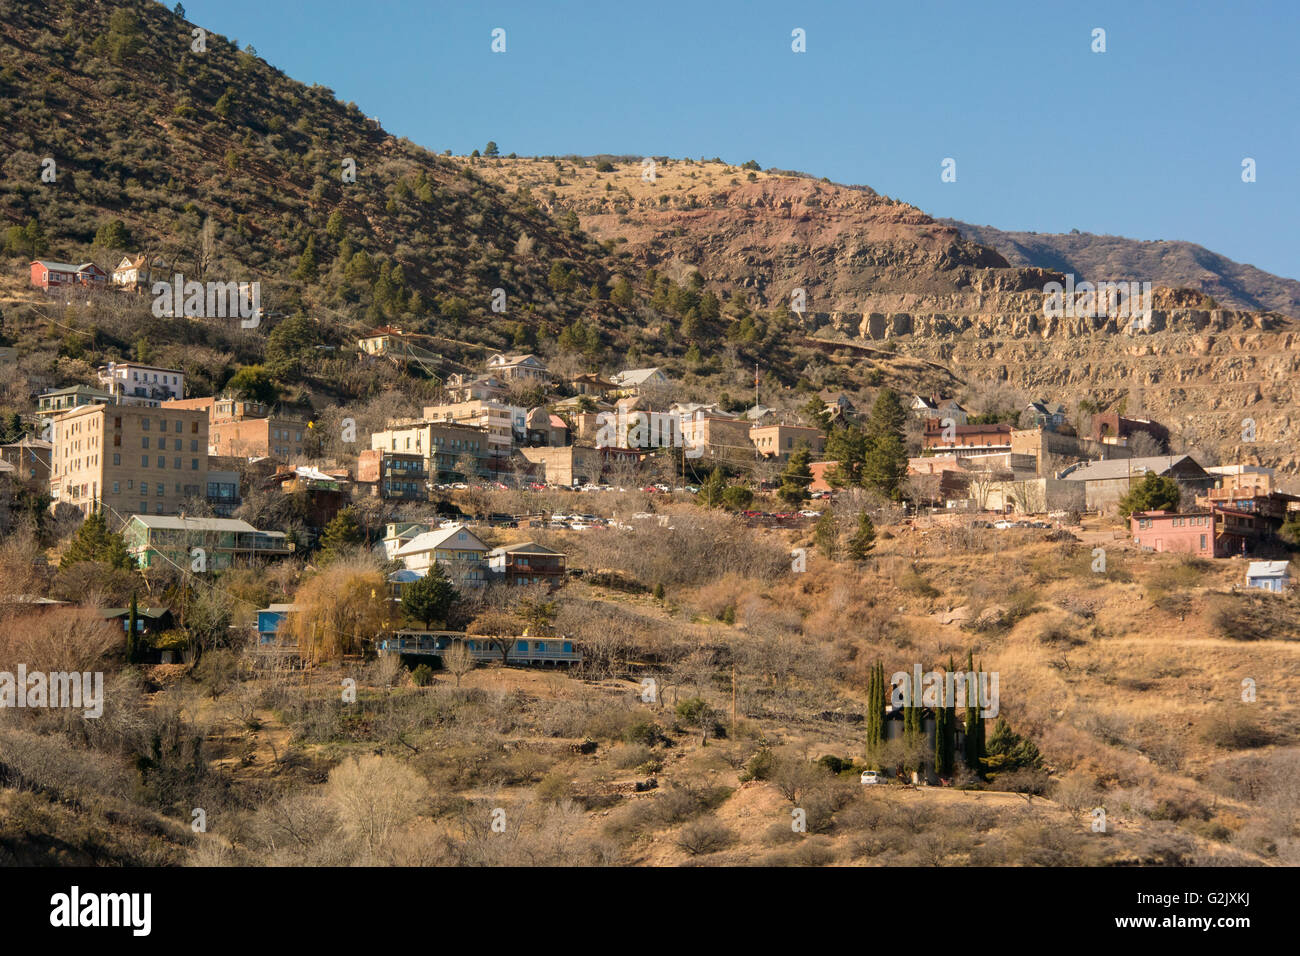 Jerome, AZ, historical copper mining town, mining tailings on right Stock Photo